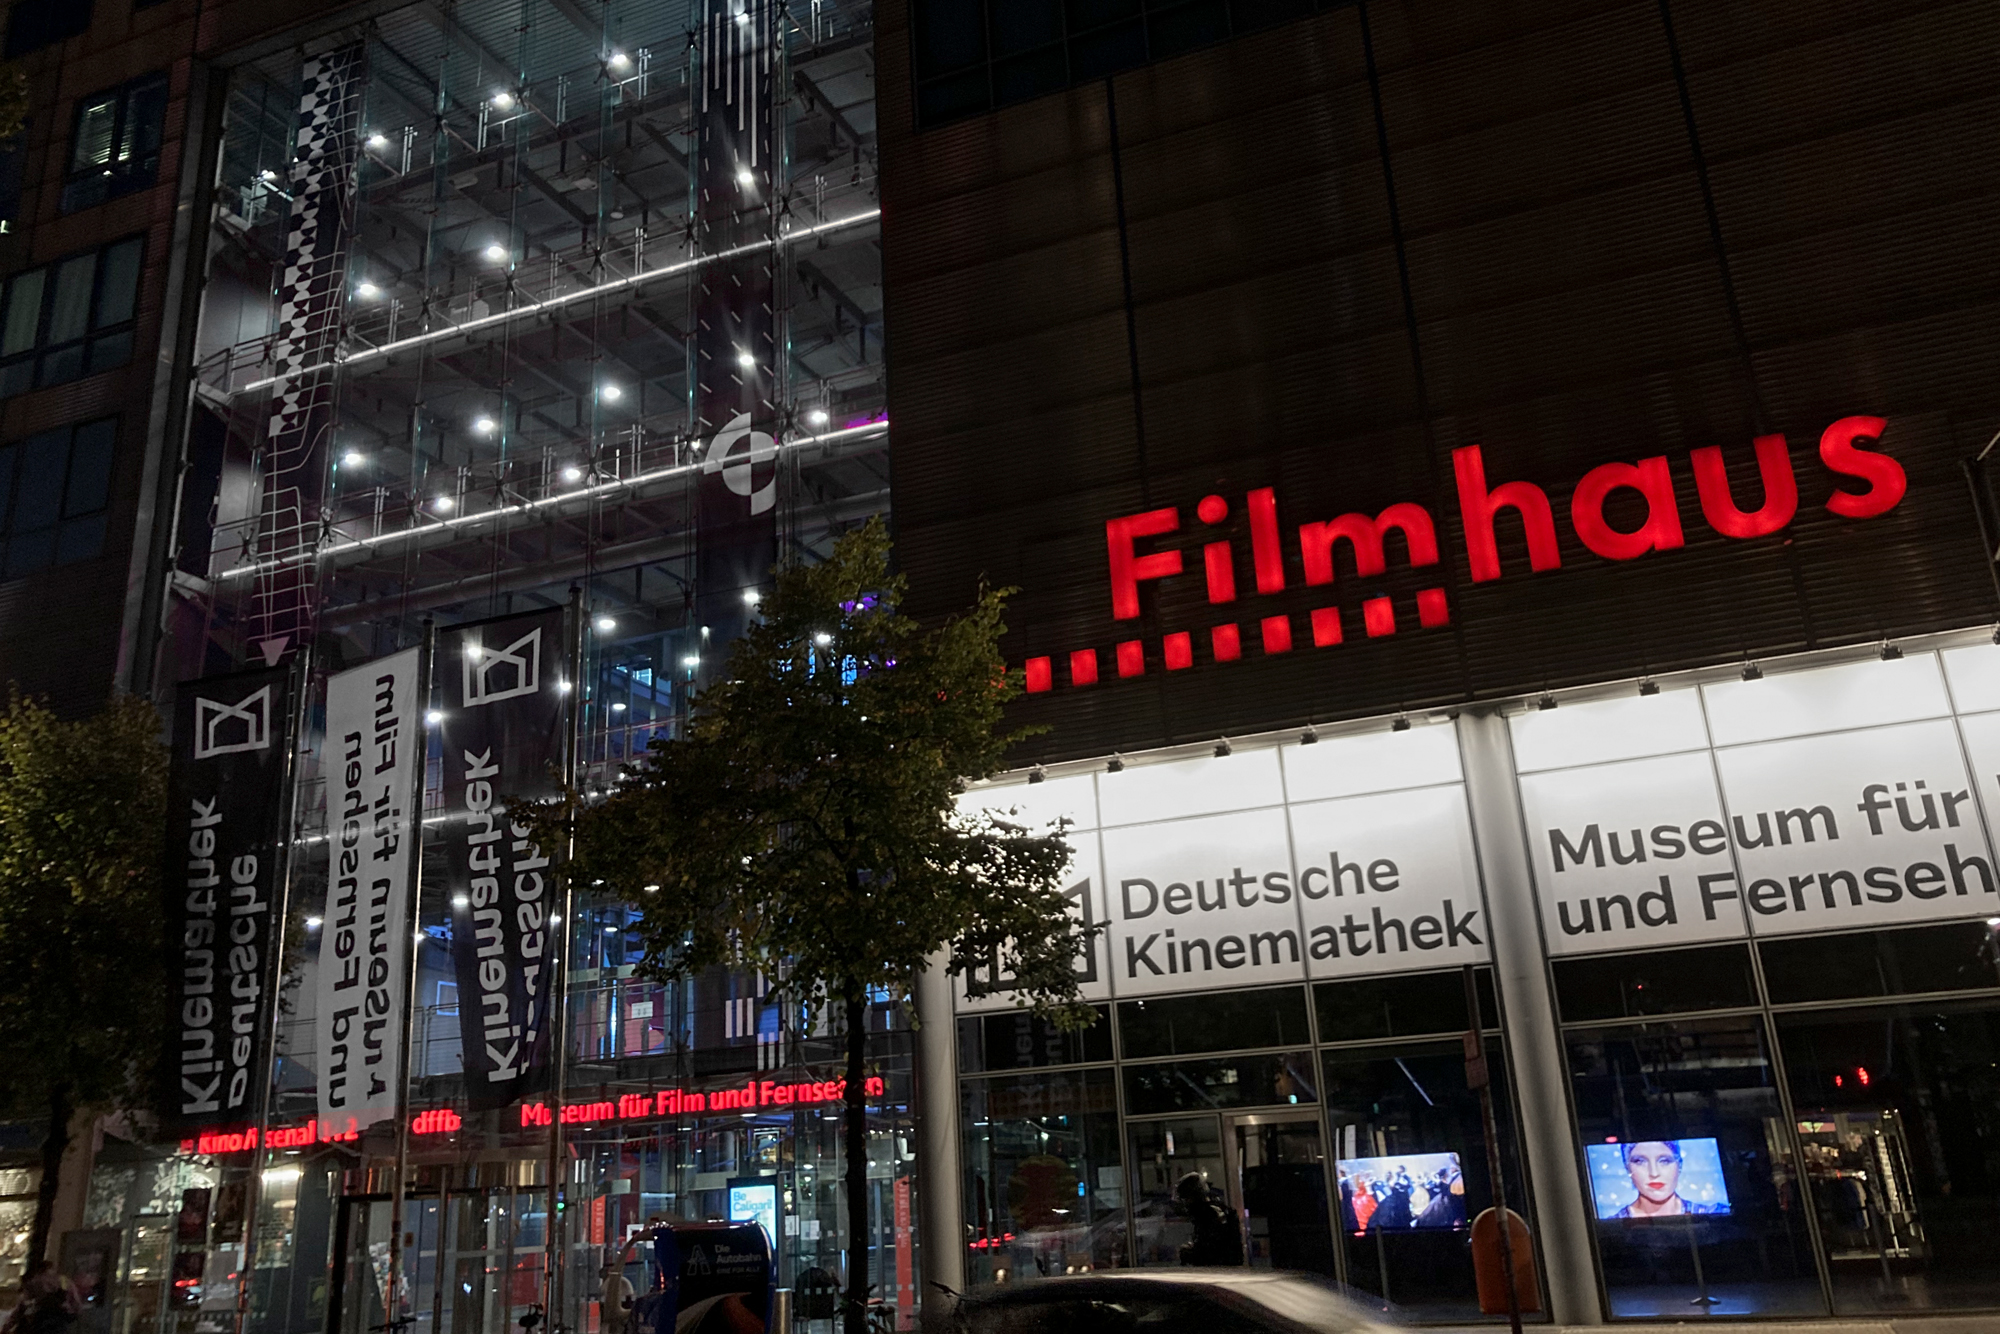 Front view from the Filmhaus in Berlin with the red lit-up label “Filmhaus”. Below are two white lit-up boards with black color “Deutsche Kinemathek” (left side) and “Museum für / und Fernseh” (right side, cut).